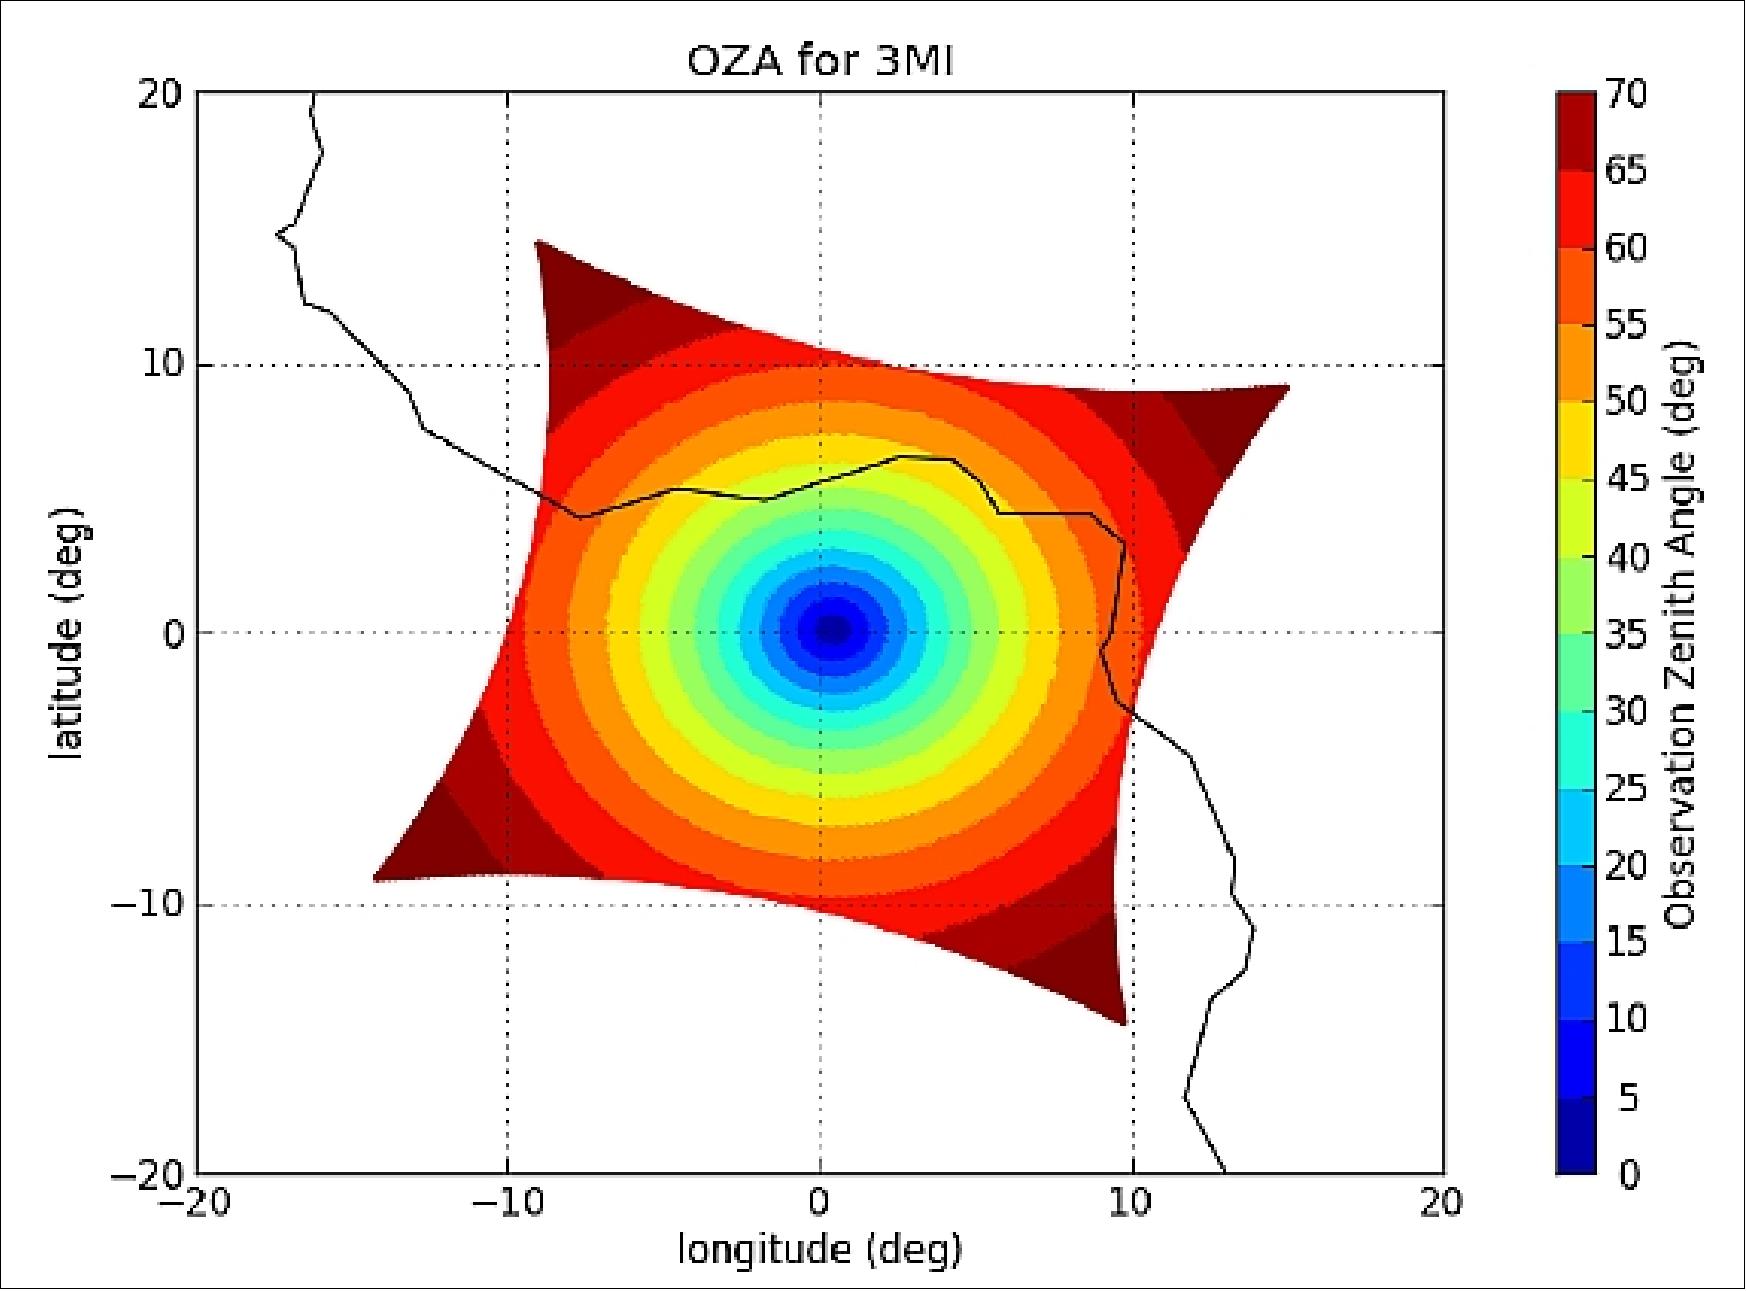 Figure 36: Footprint of the 3MI VNIR channels; the colors indicate the recorded observational zenith angle at any given point within the FOV of the instrument (image credit: ESA)